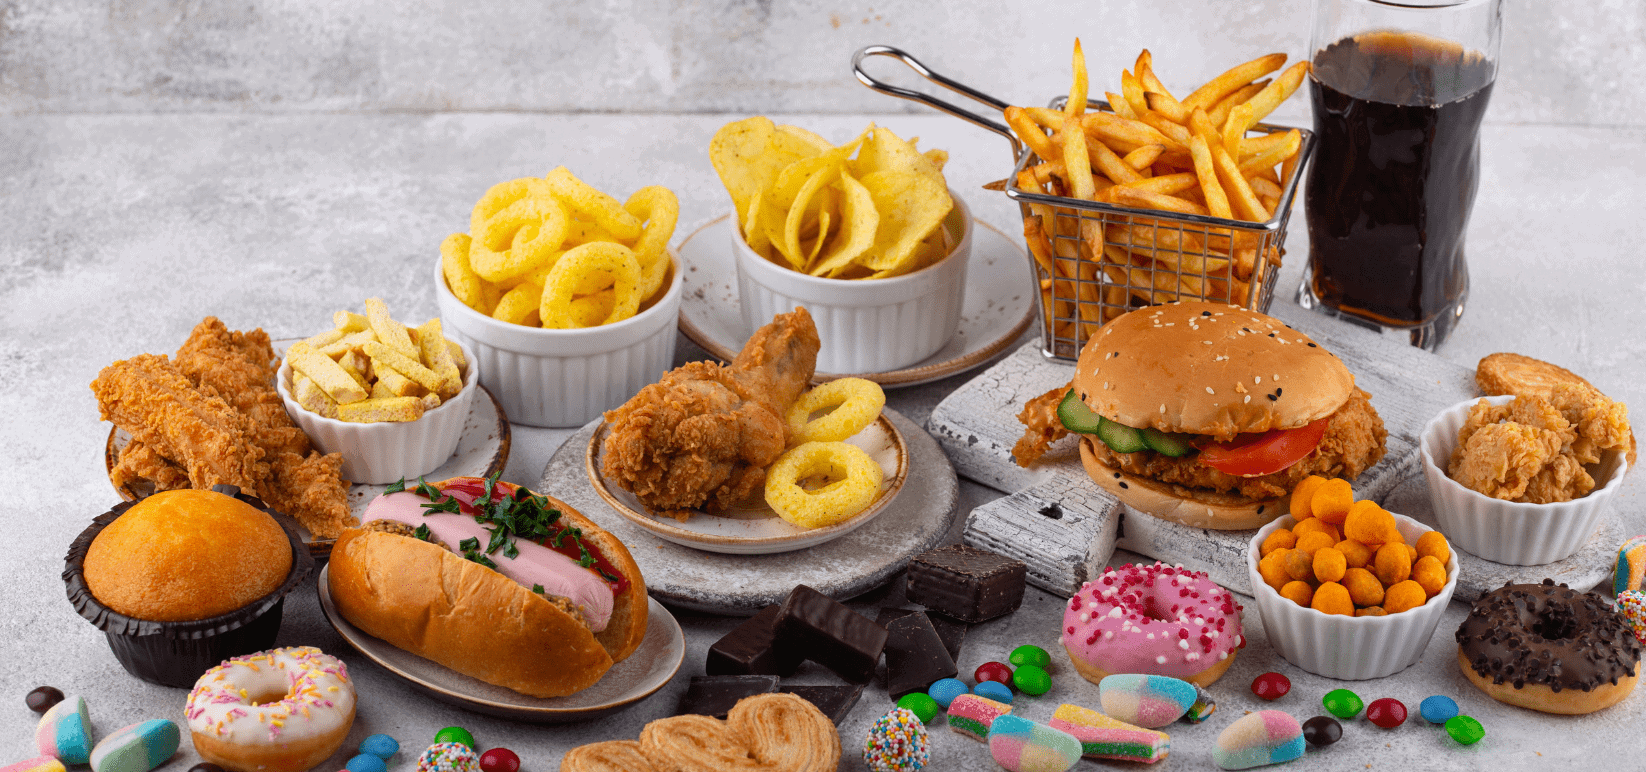 A smorgasbord of unhealthy fast foods and sweets